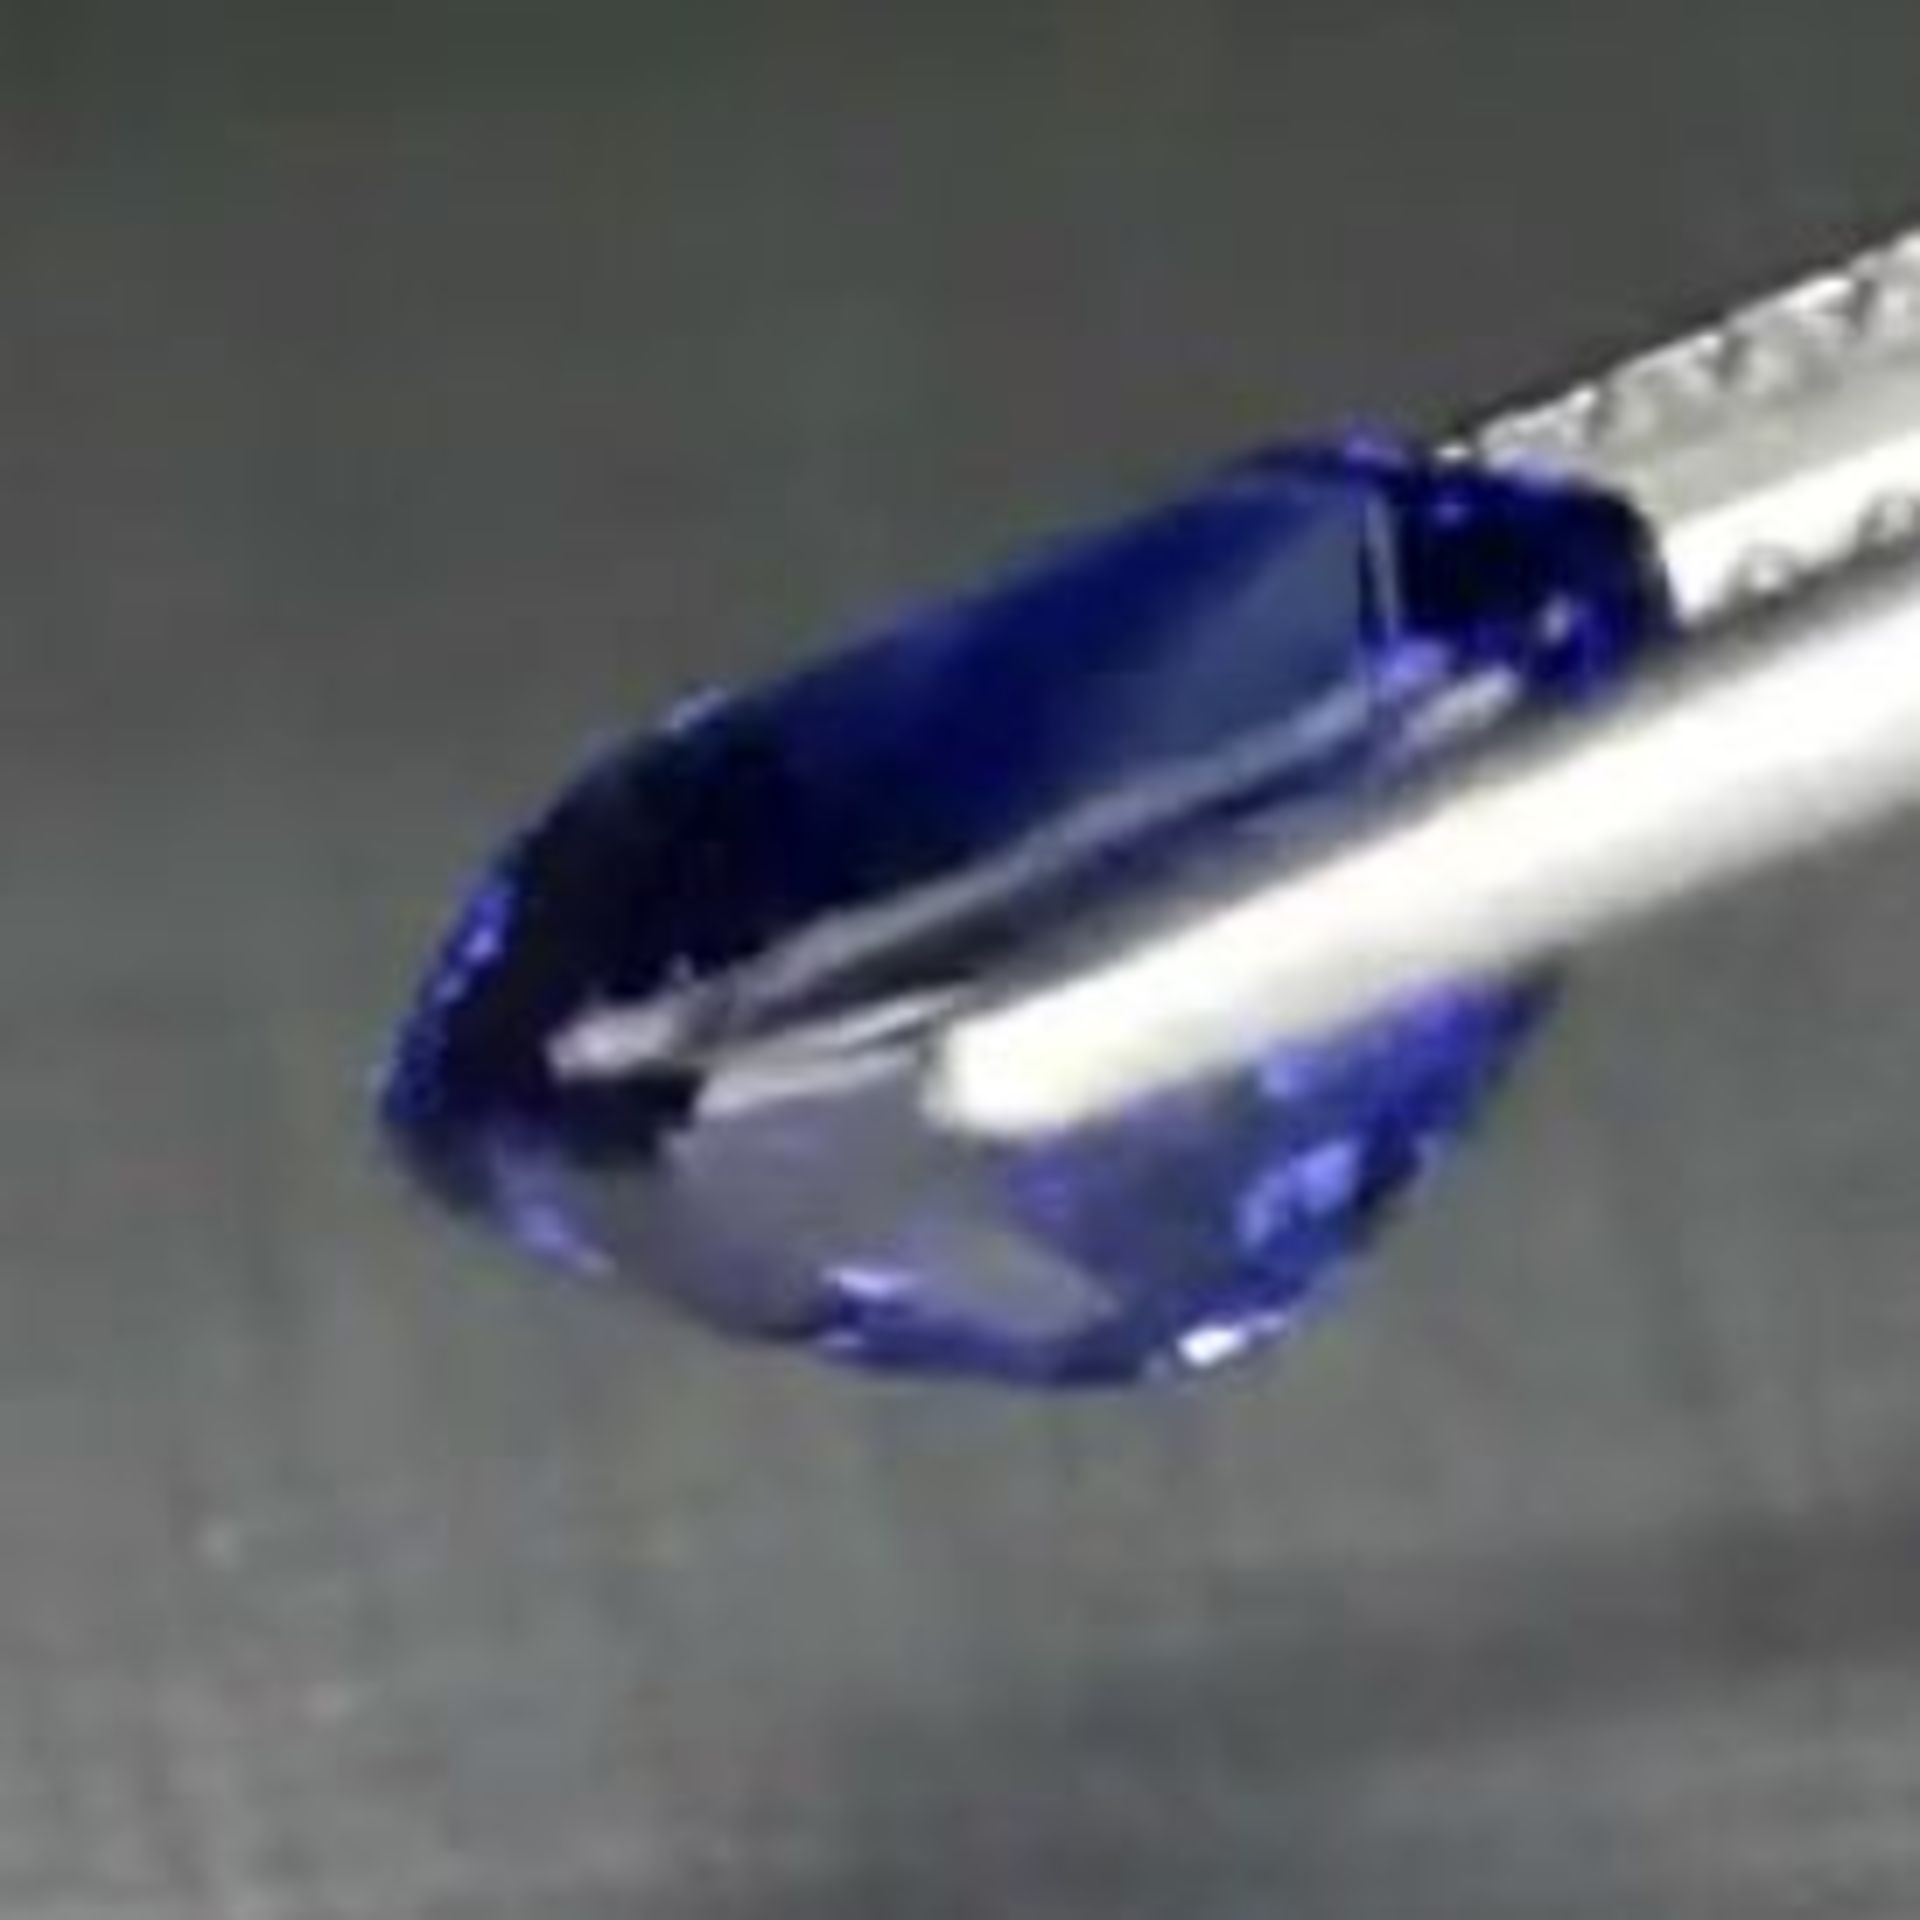 GIA Certified 2.08 ct. Blue Sapphire - Image 9 of 10